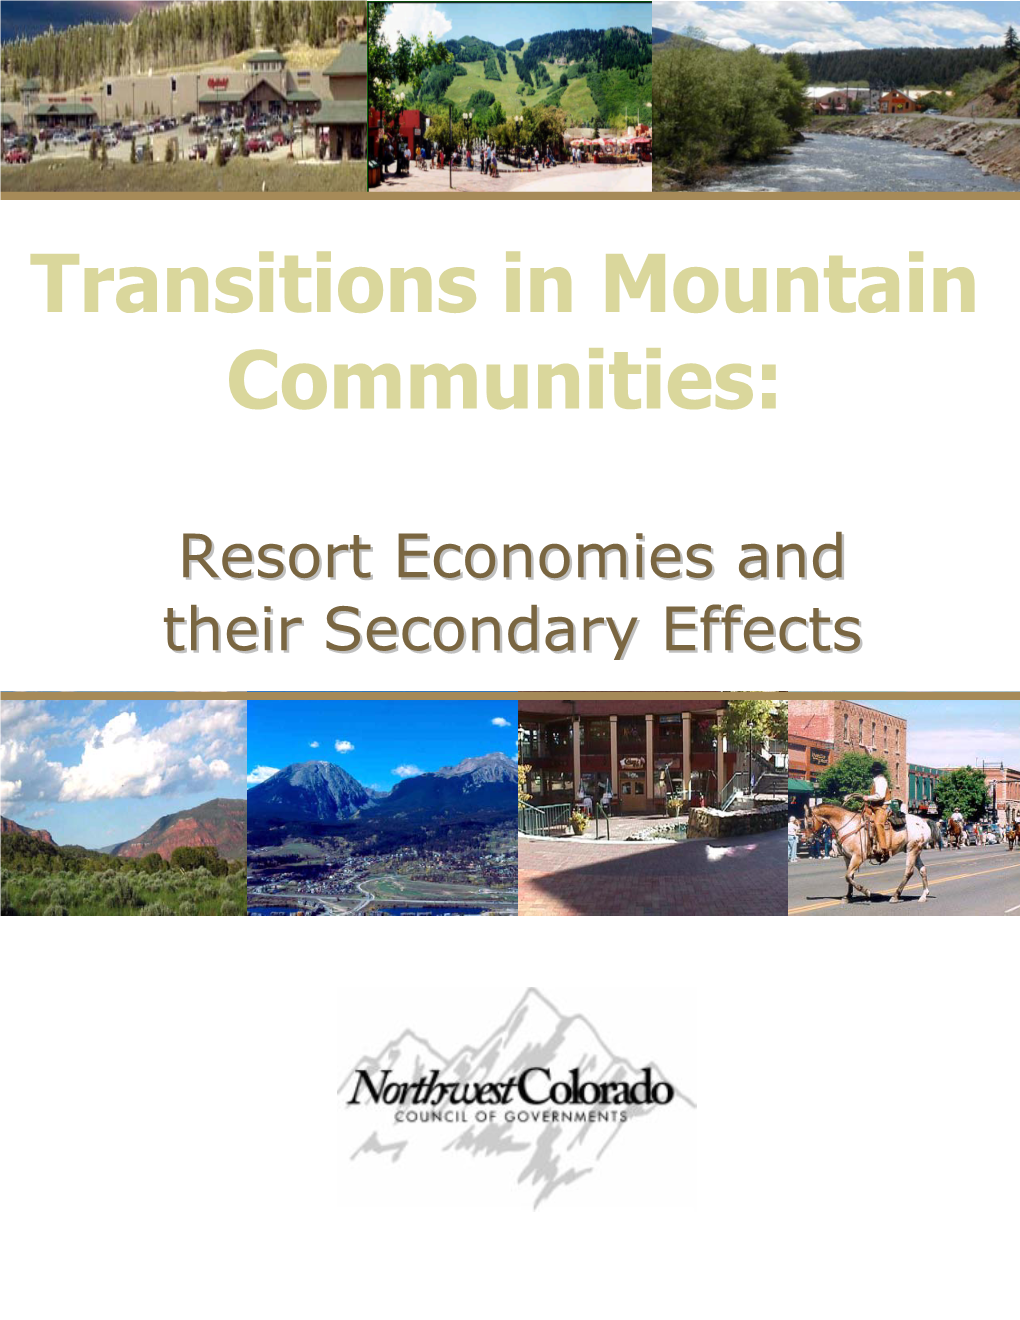 Transitions in Mountain Communities: Resort Economies and Their Secondary Effects